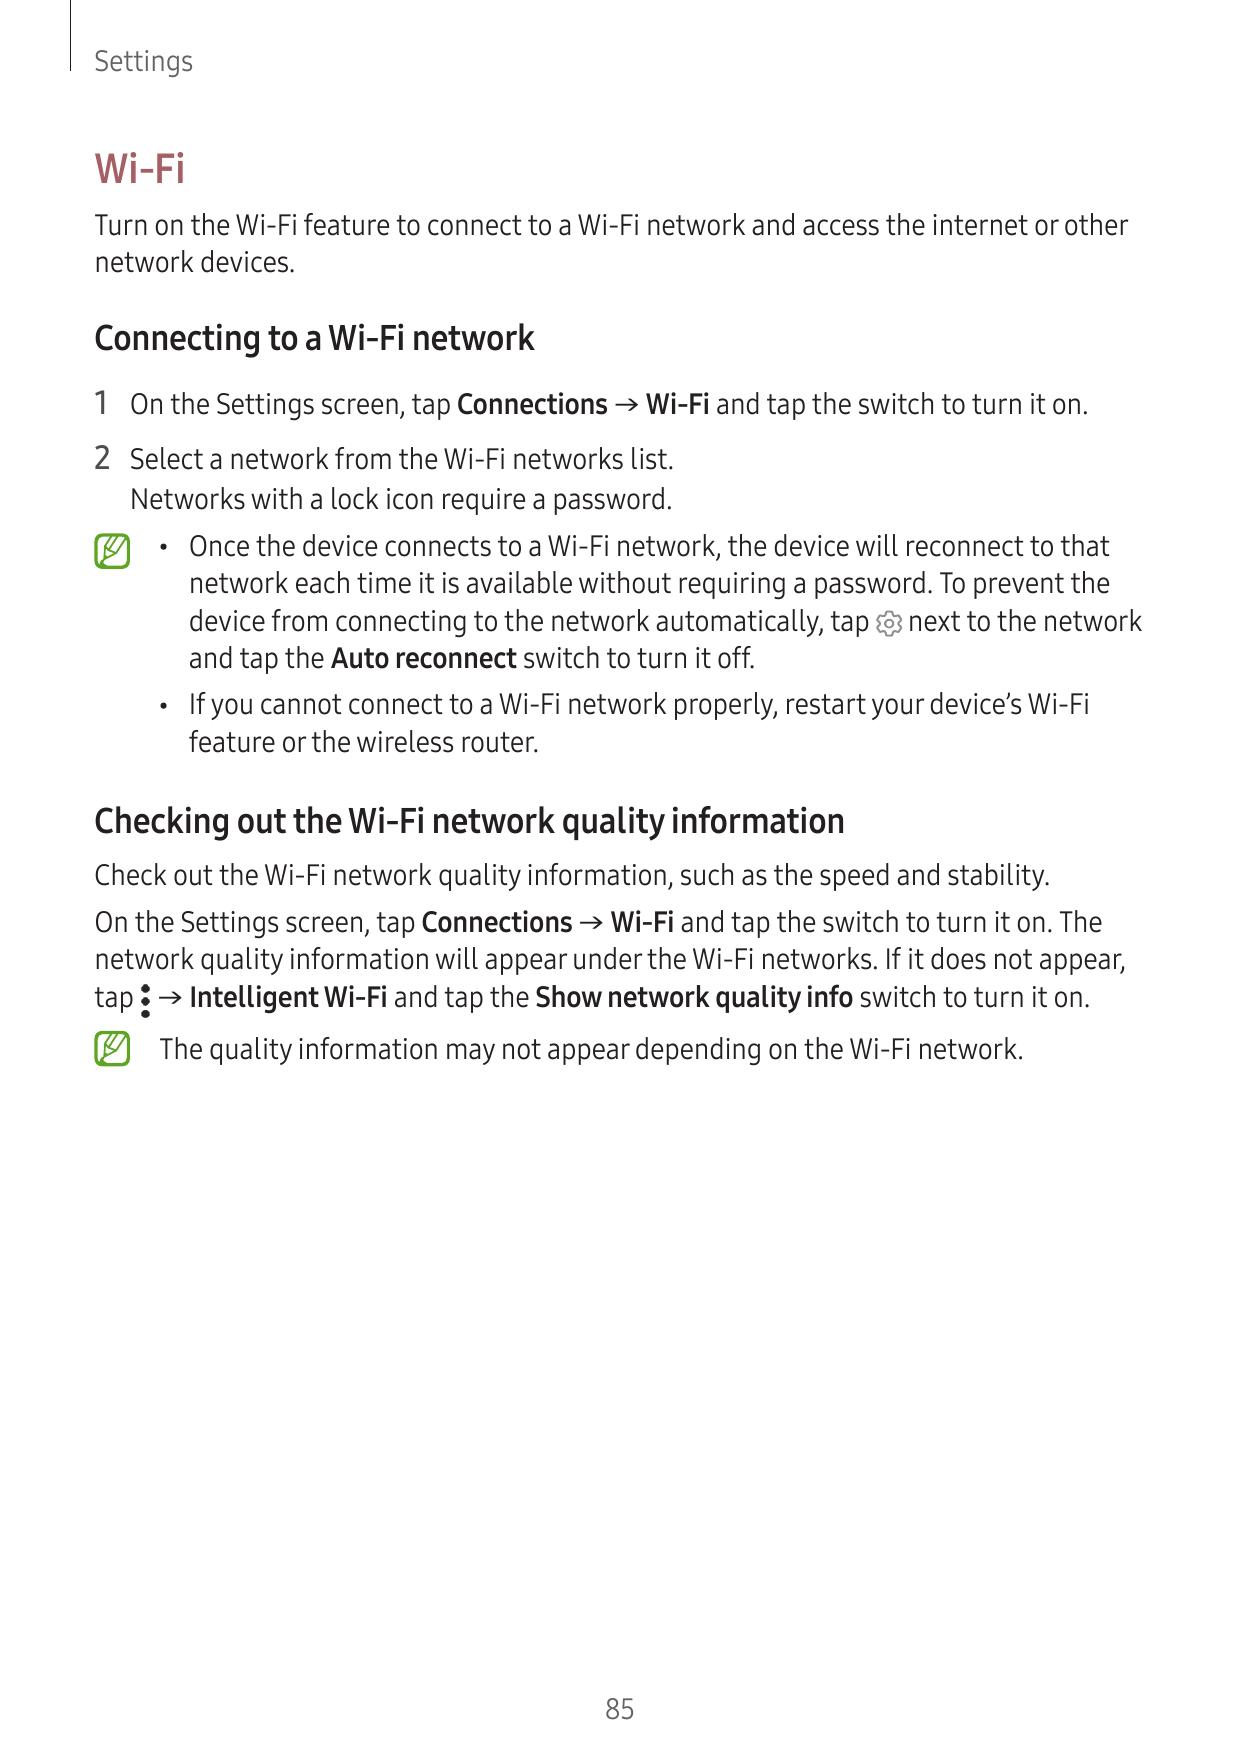 SettingsWi-FiTurn on the Wi-Fi feature to connect to a Wi-Fi network and access the internet or othernetwork devices.Connecting 